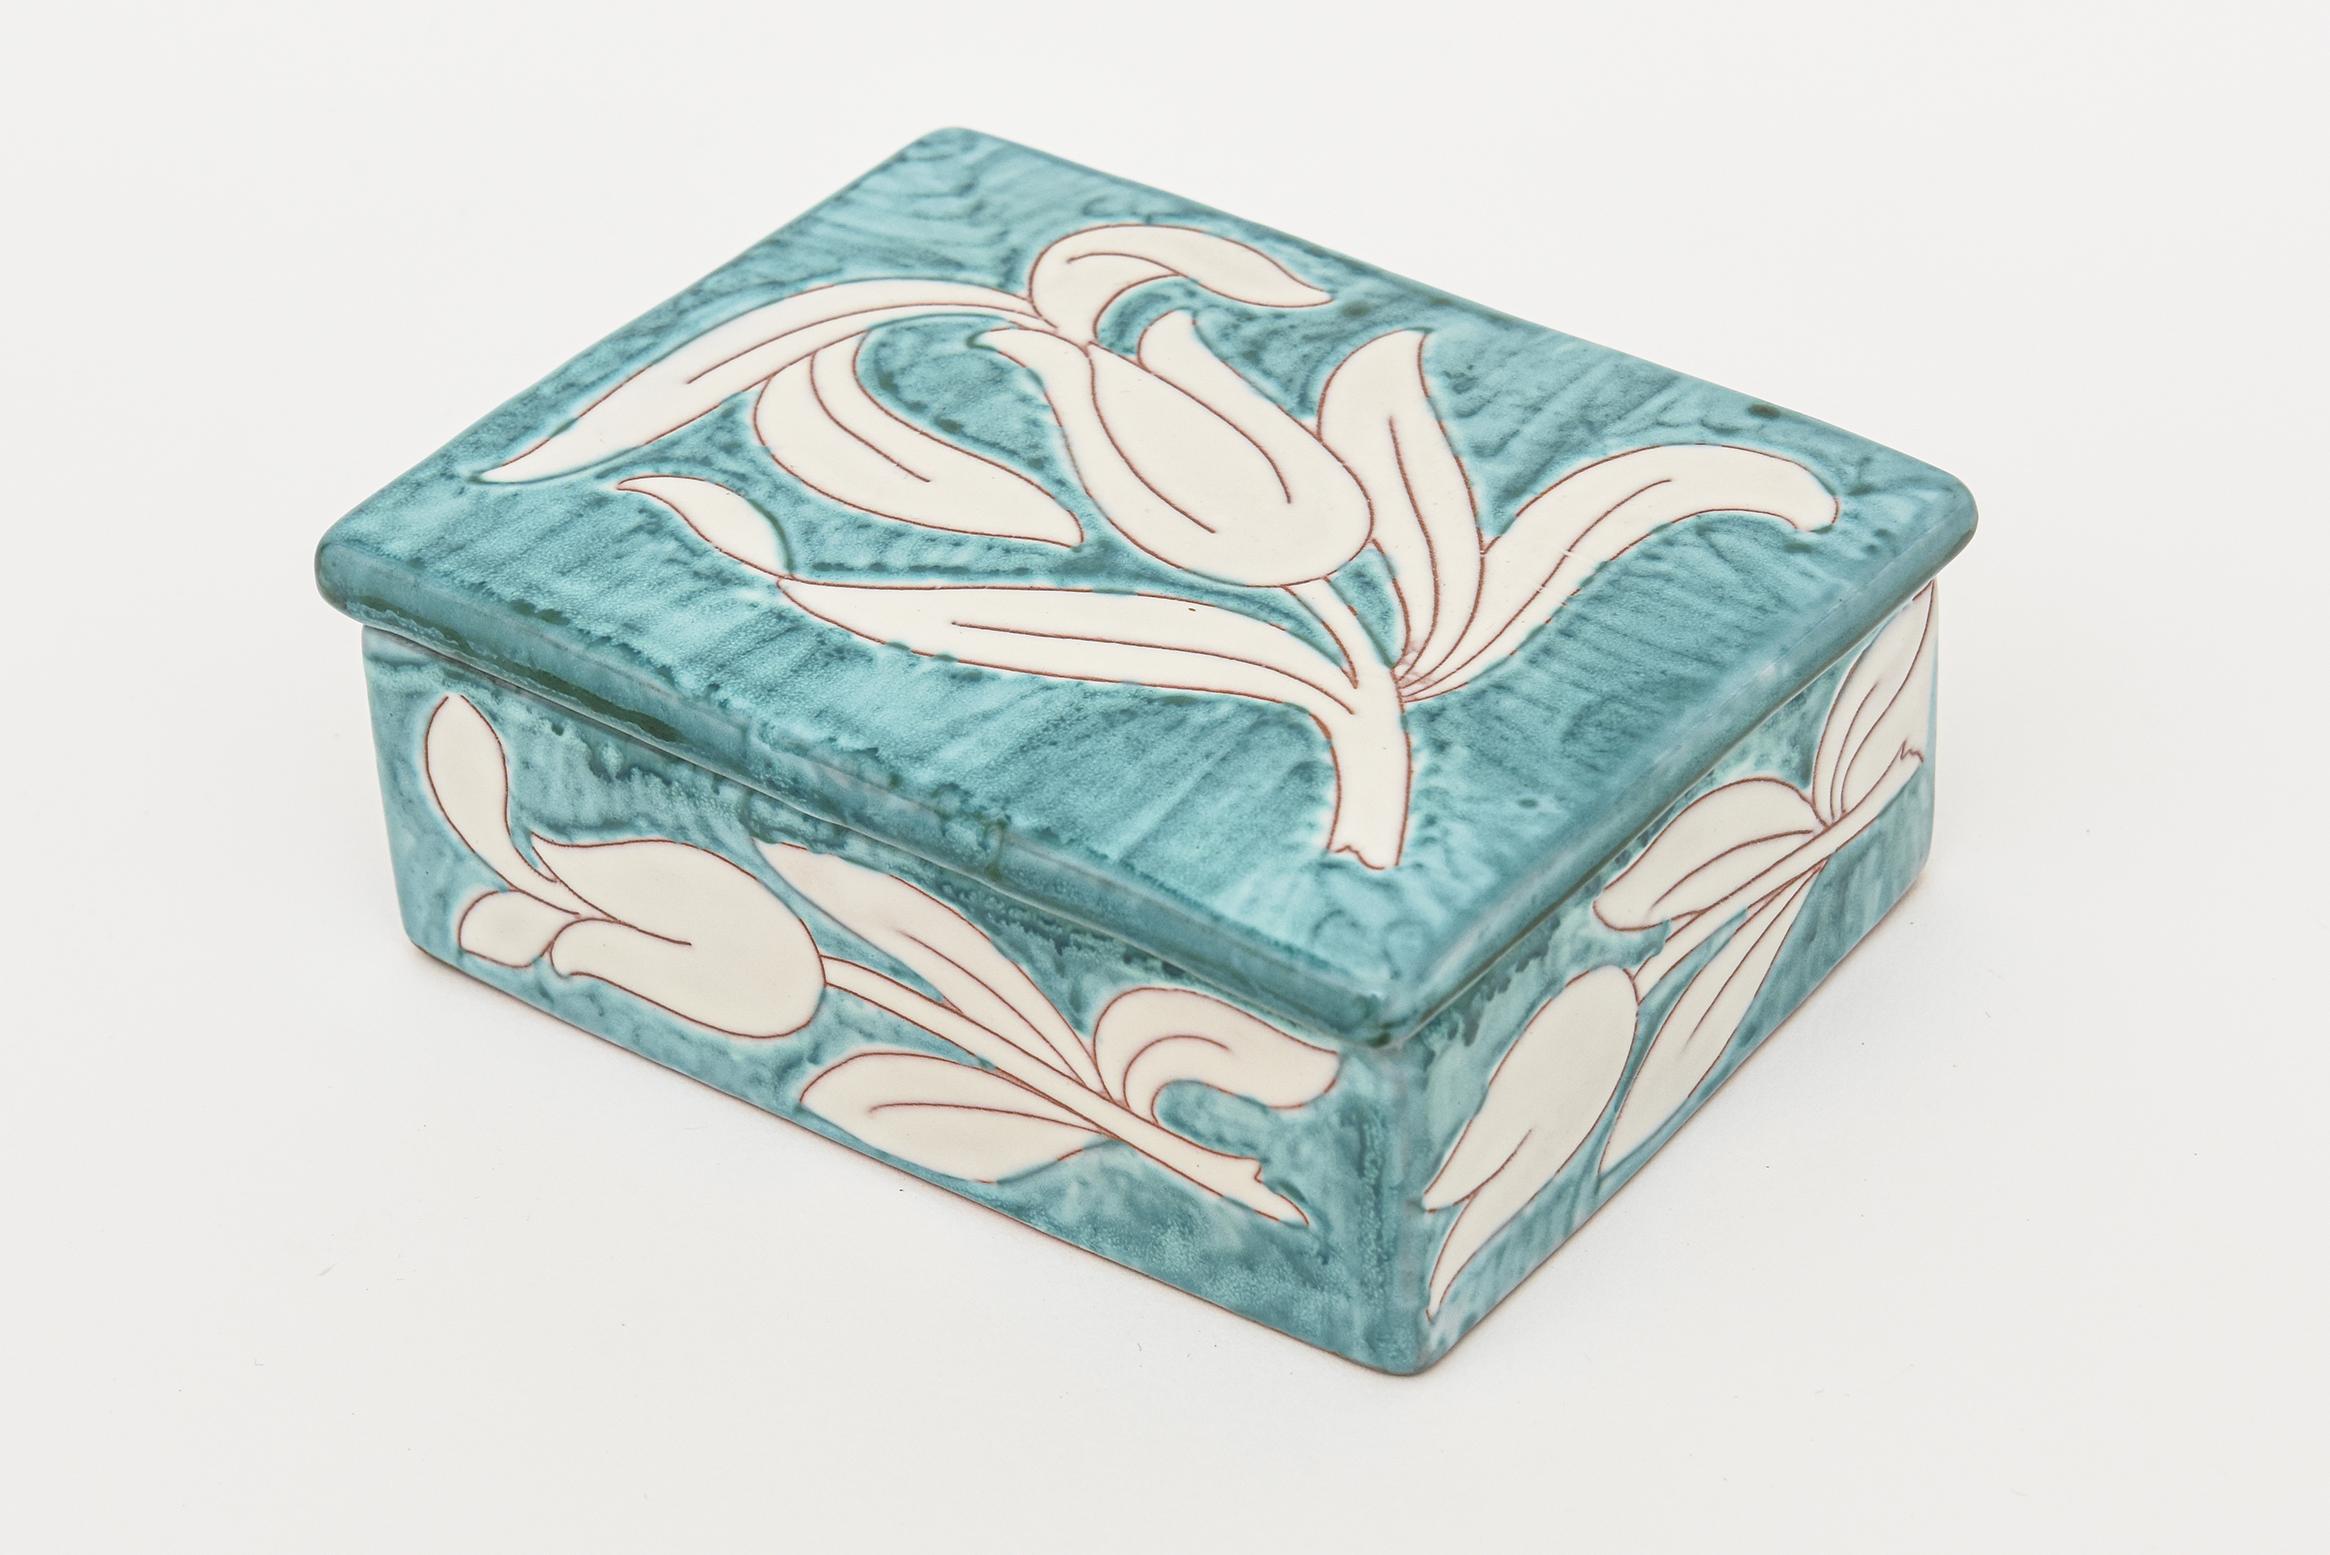 This lovely vintage Italian hallmarked lidded ceramic flower box by Raymor is from the 60's. The colors are turquoise, white with outlines of gray charcoal. The hallmarks read 03529 Italy rpv. Makes a great desk accessory. PLEASE NOTE: THIS IS NOW